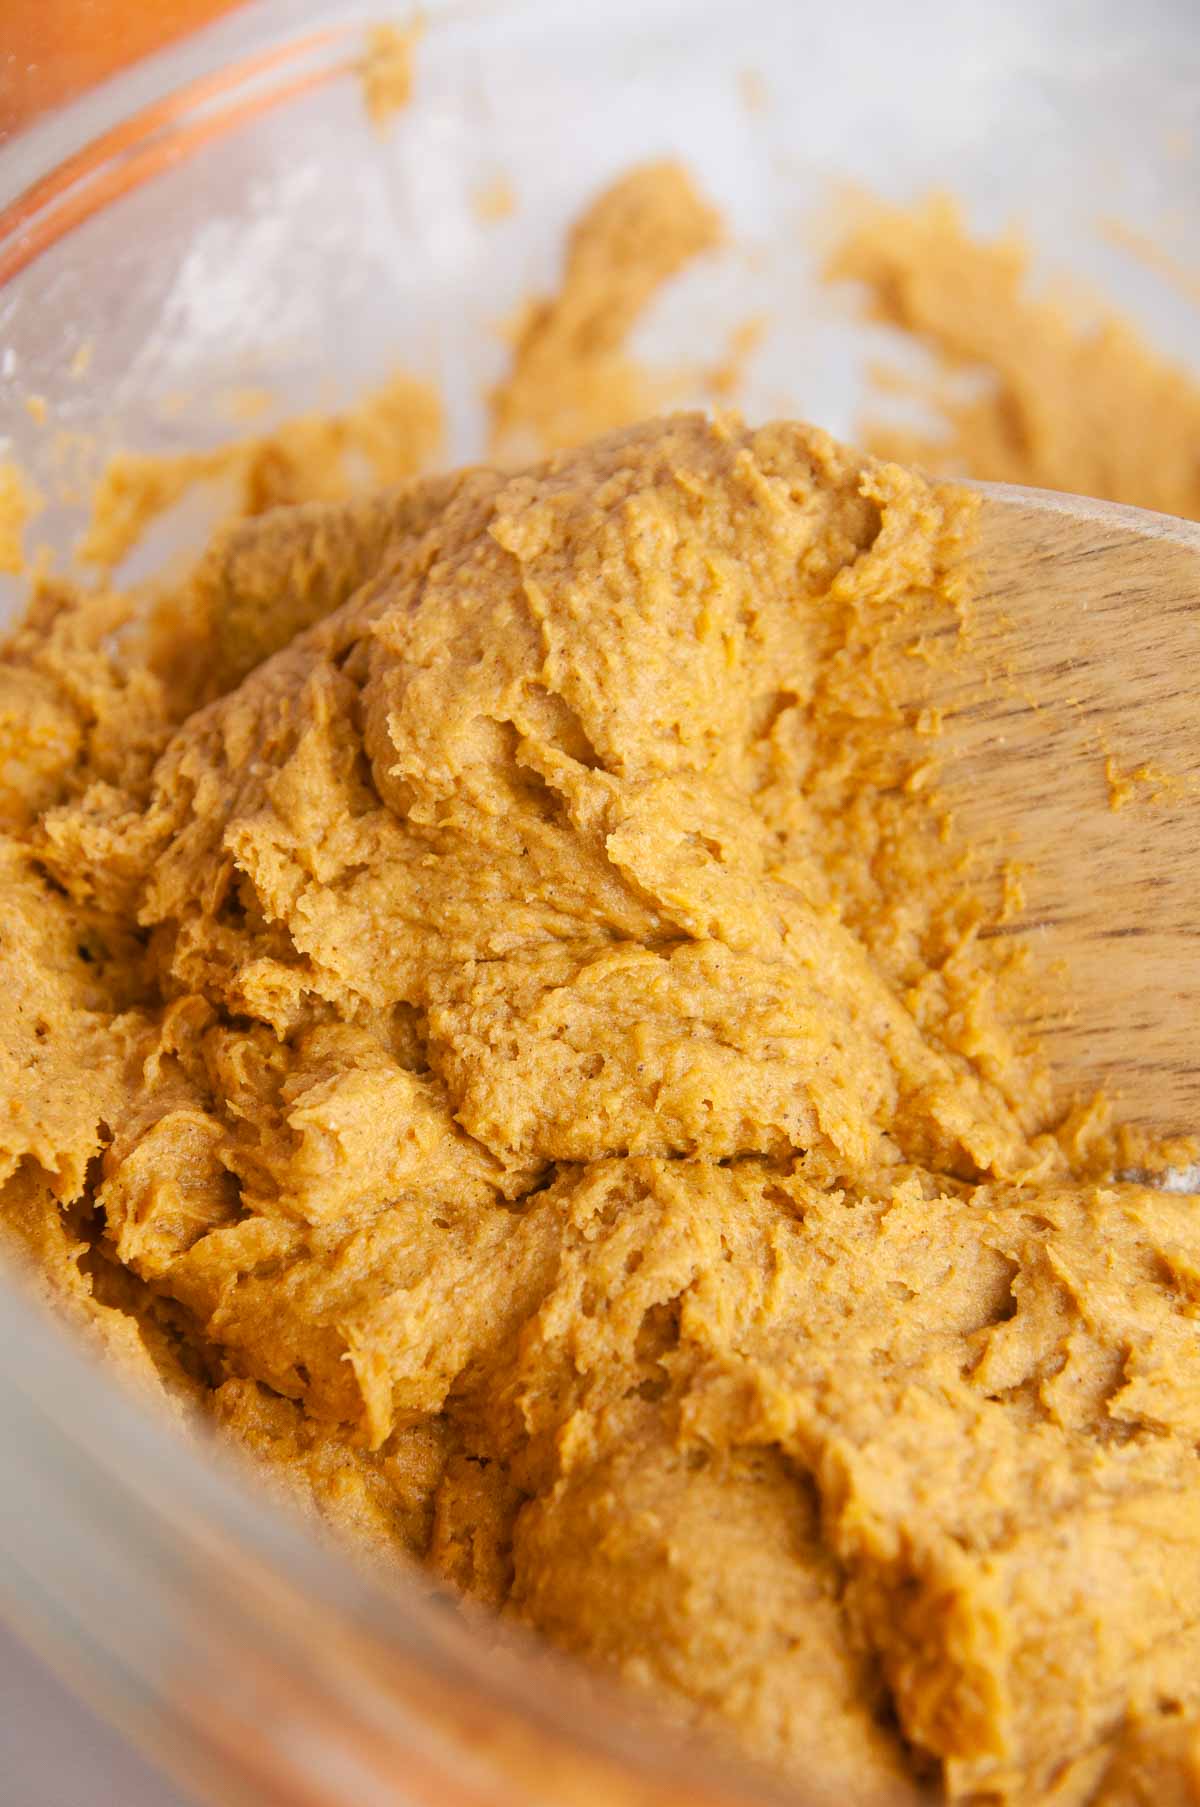 After you mix the pumpkin puree with the cake mix, the batter will be very thick.